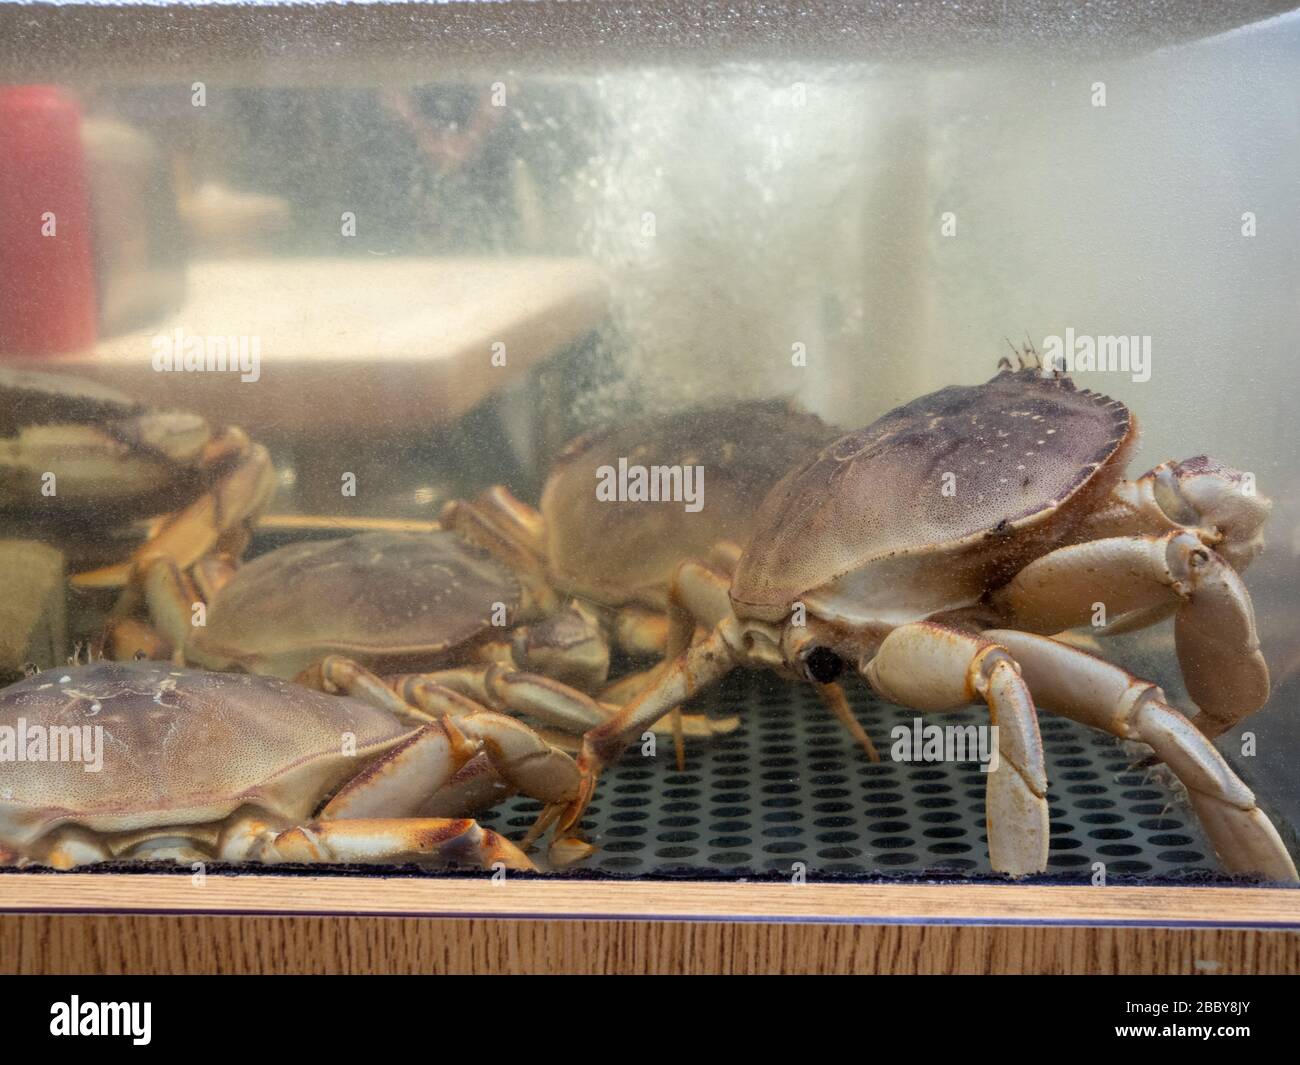 Large pile of dungeness crab sitting in tank in seafood market Stock Photo